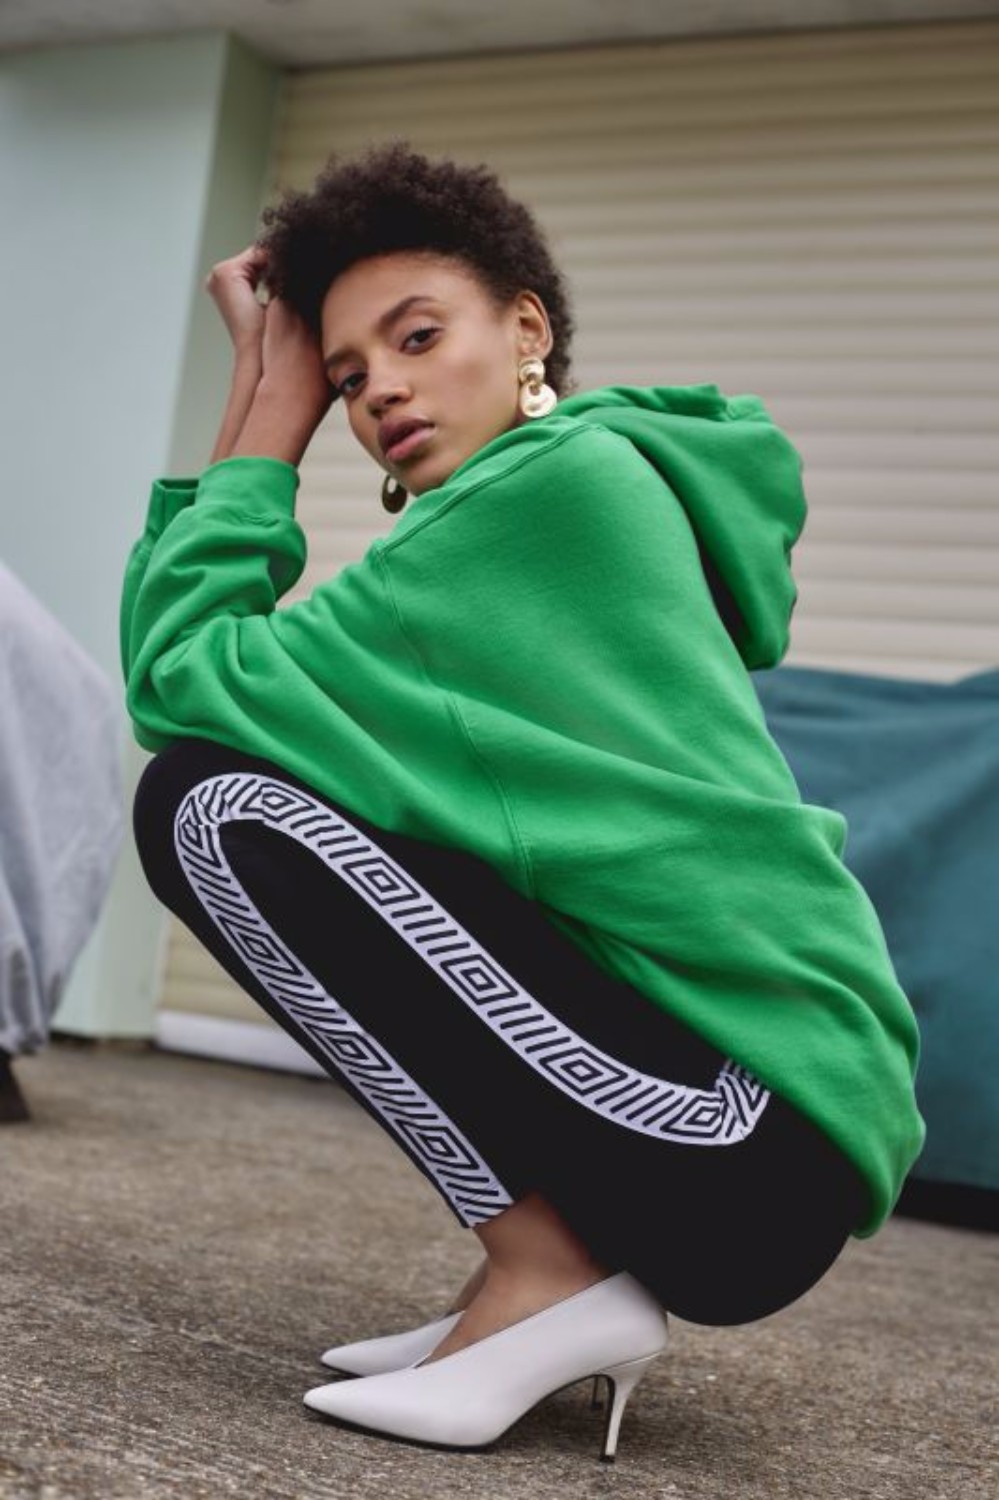 Umbro Channels Effortless Cool With Women's Urban Outfitters Collaboration